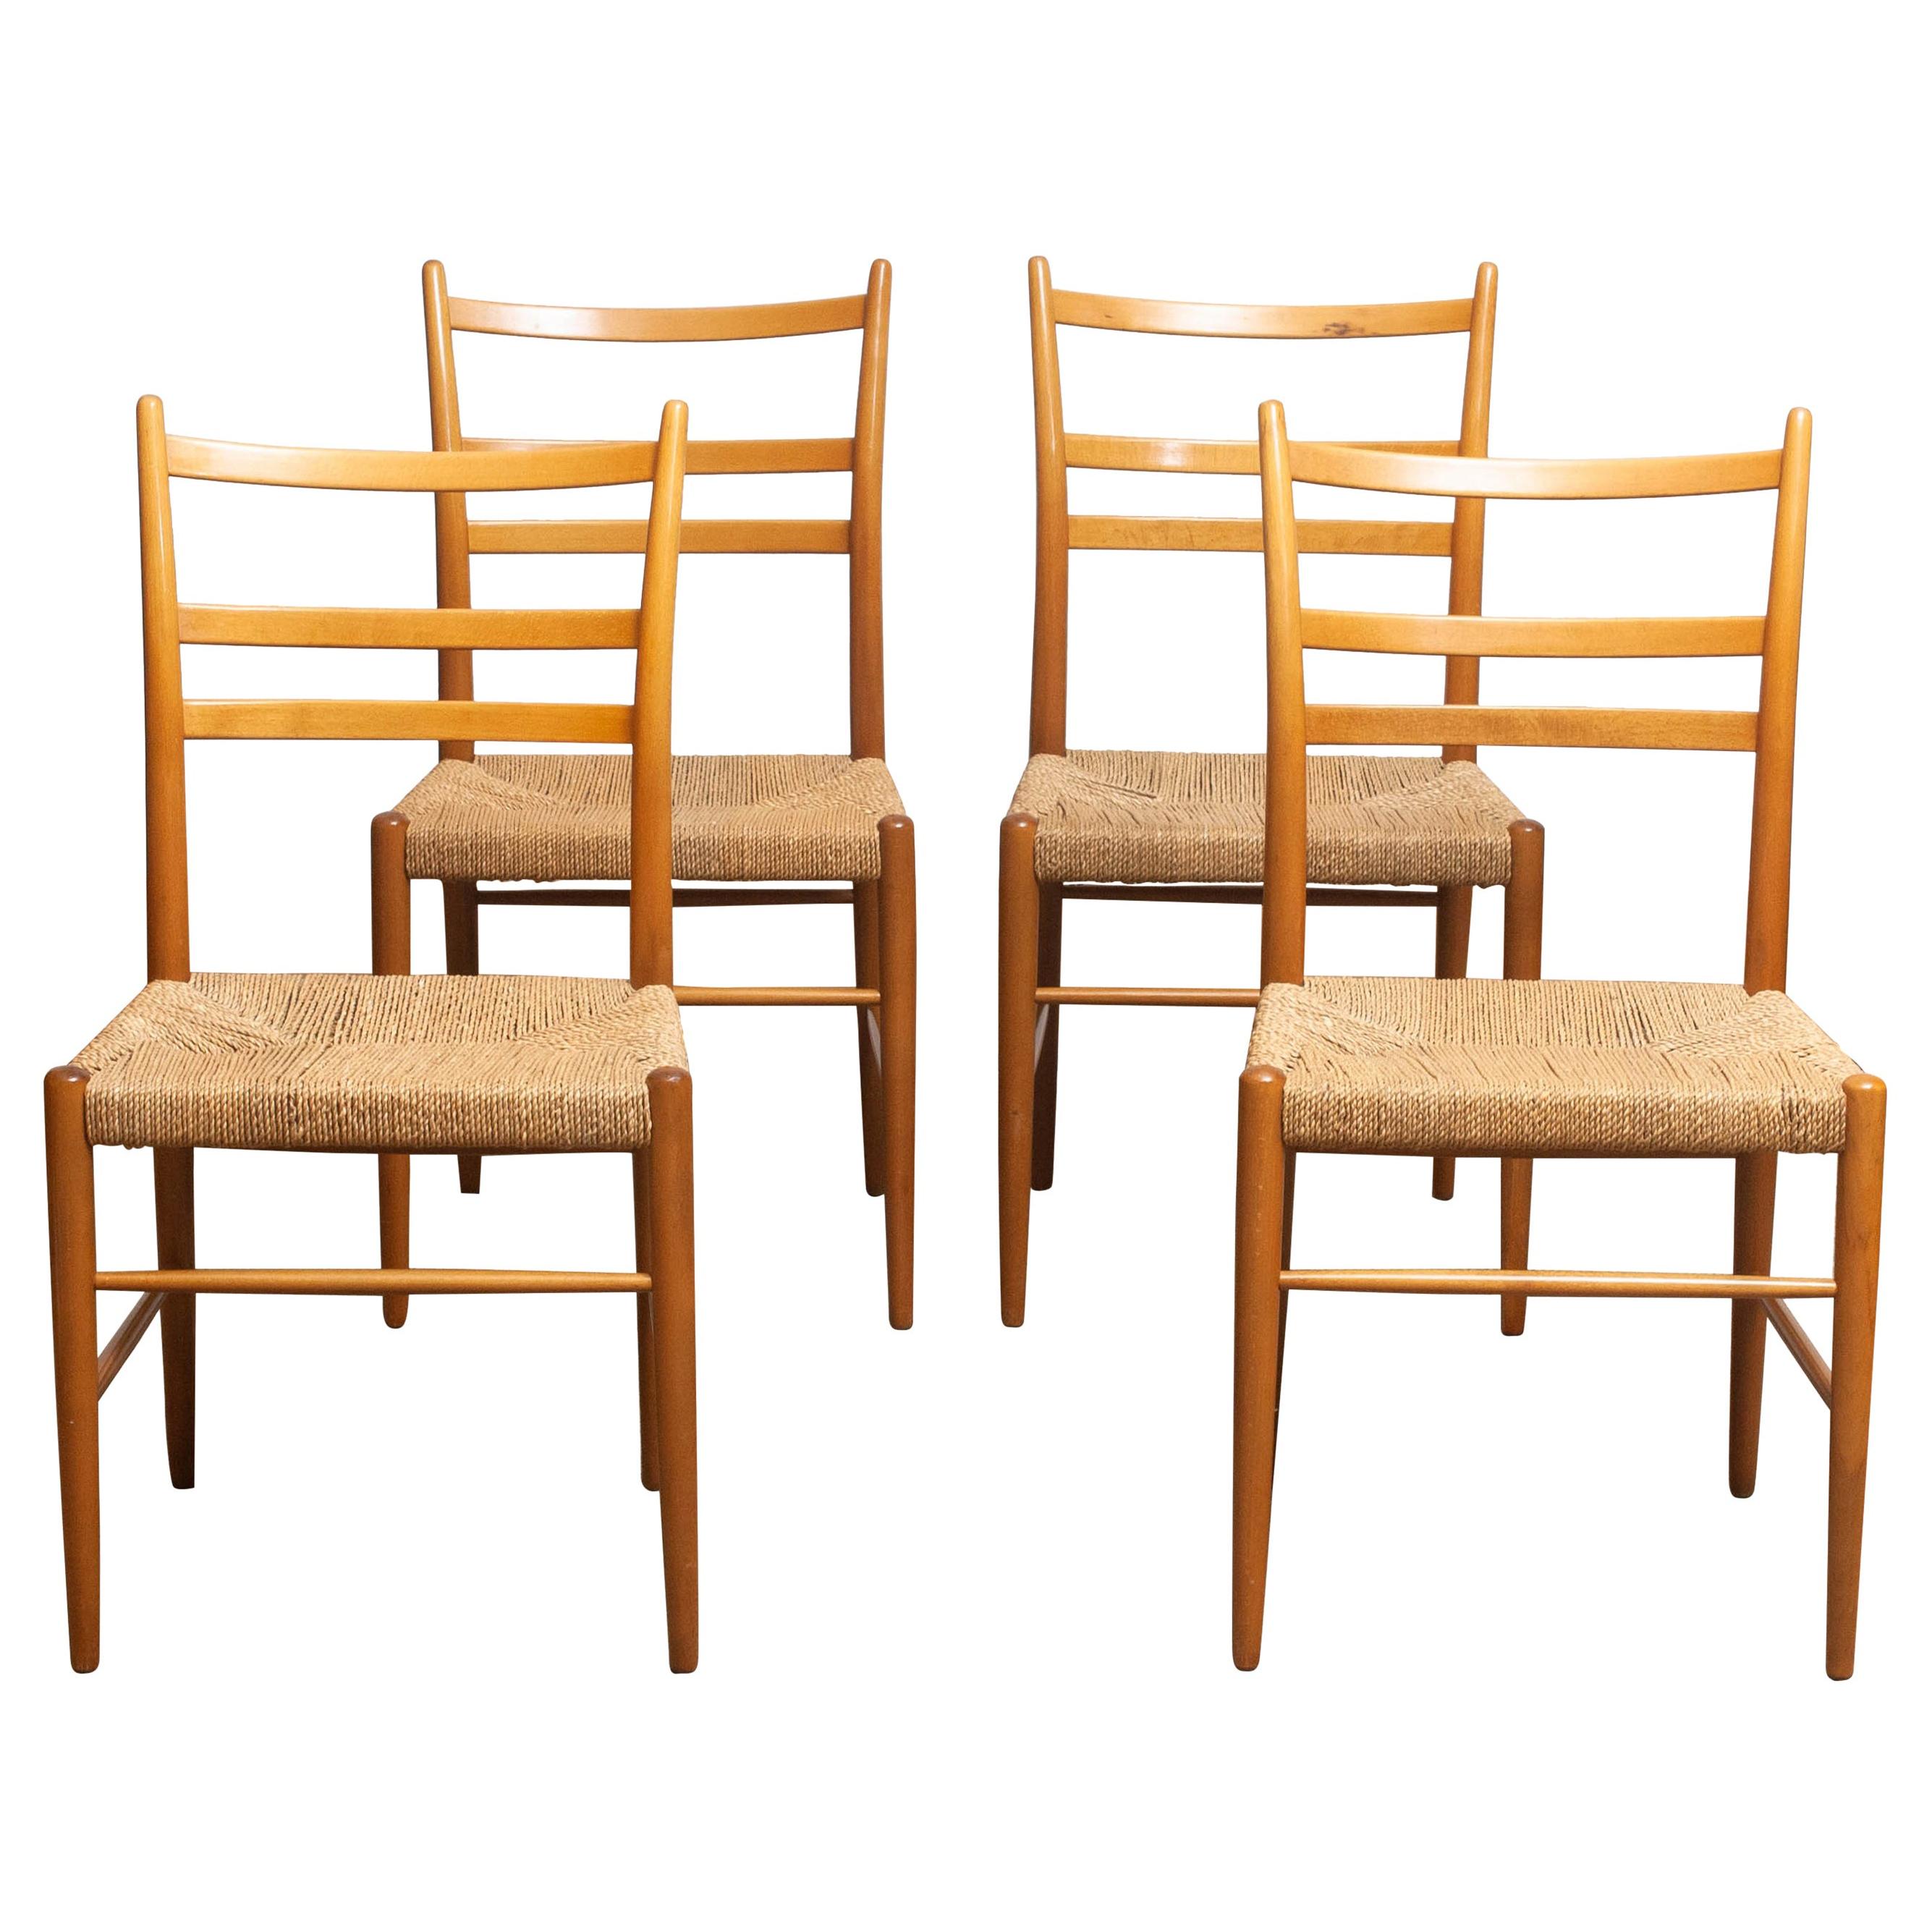 Extremely rare and beautiful set of four slim seagrass chairs in beech, model 'Gracell' designed by Yngve Ekström and manufactured by Gemla. All four chairs are in very good condition. The wicker seats are made of seagrass and are also in great